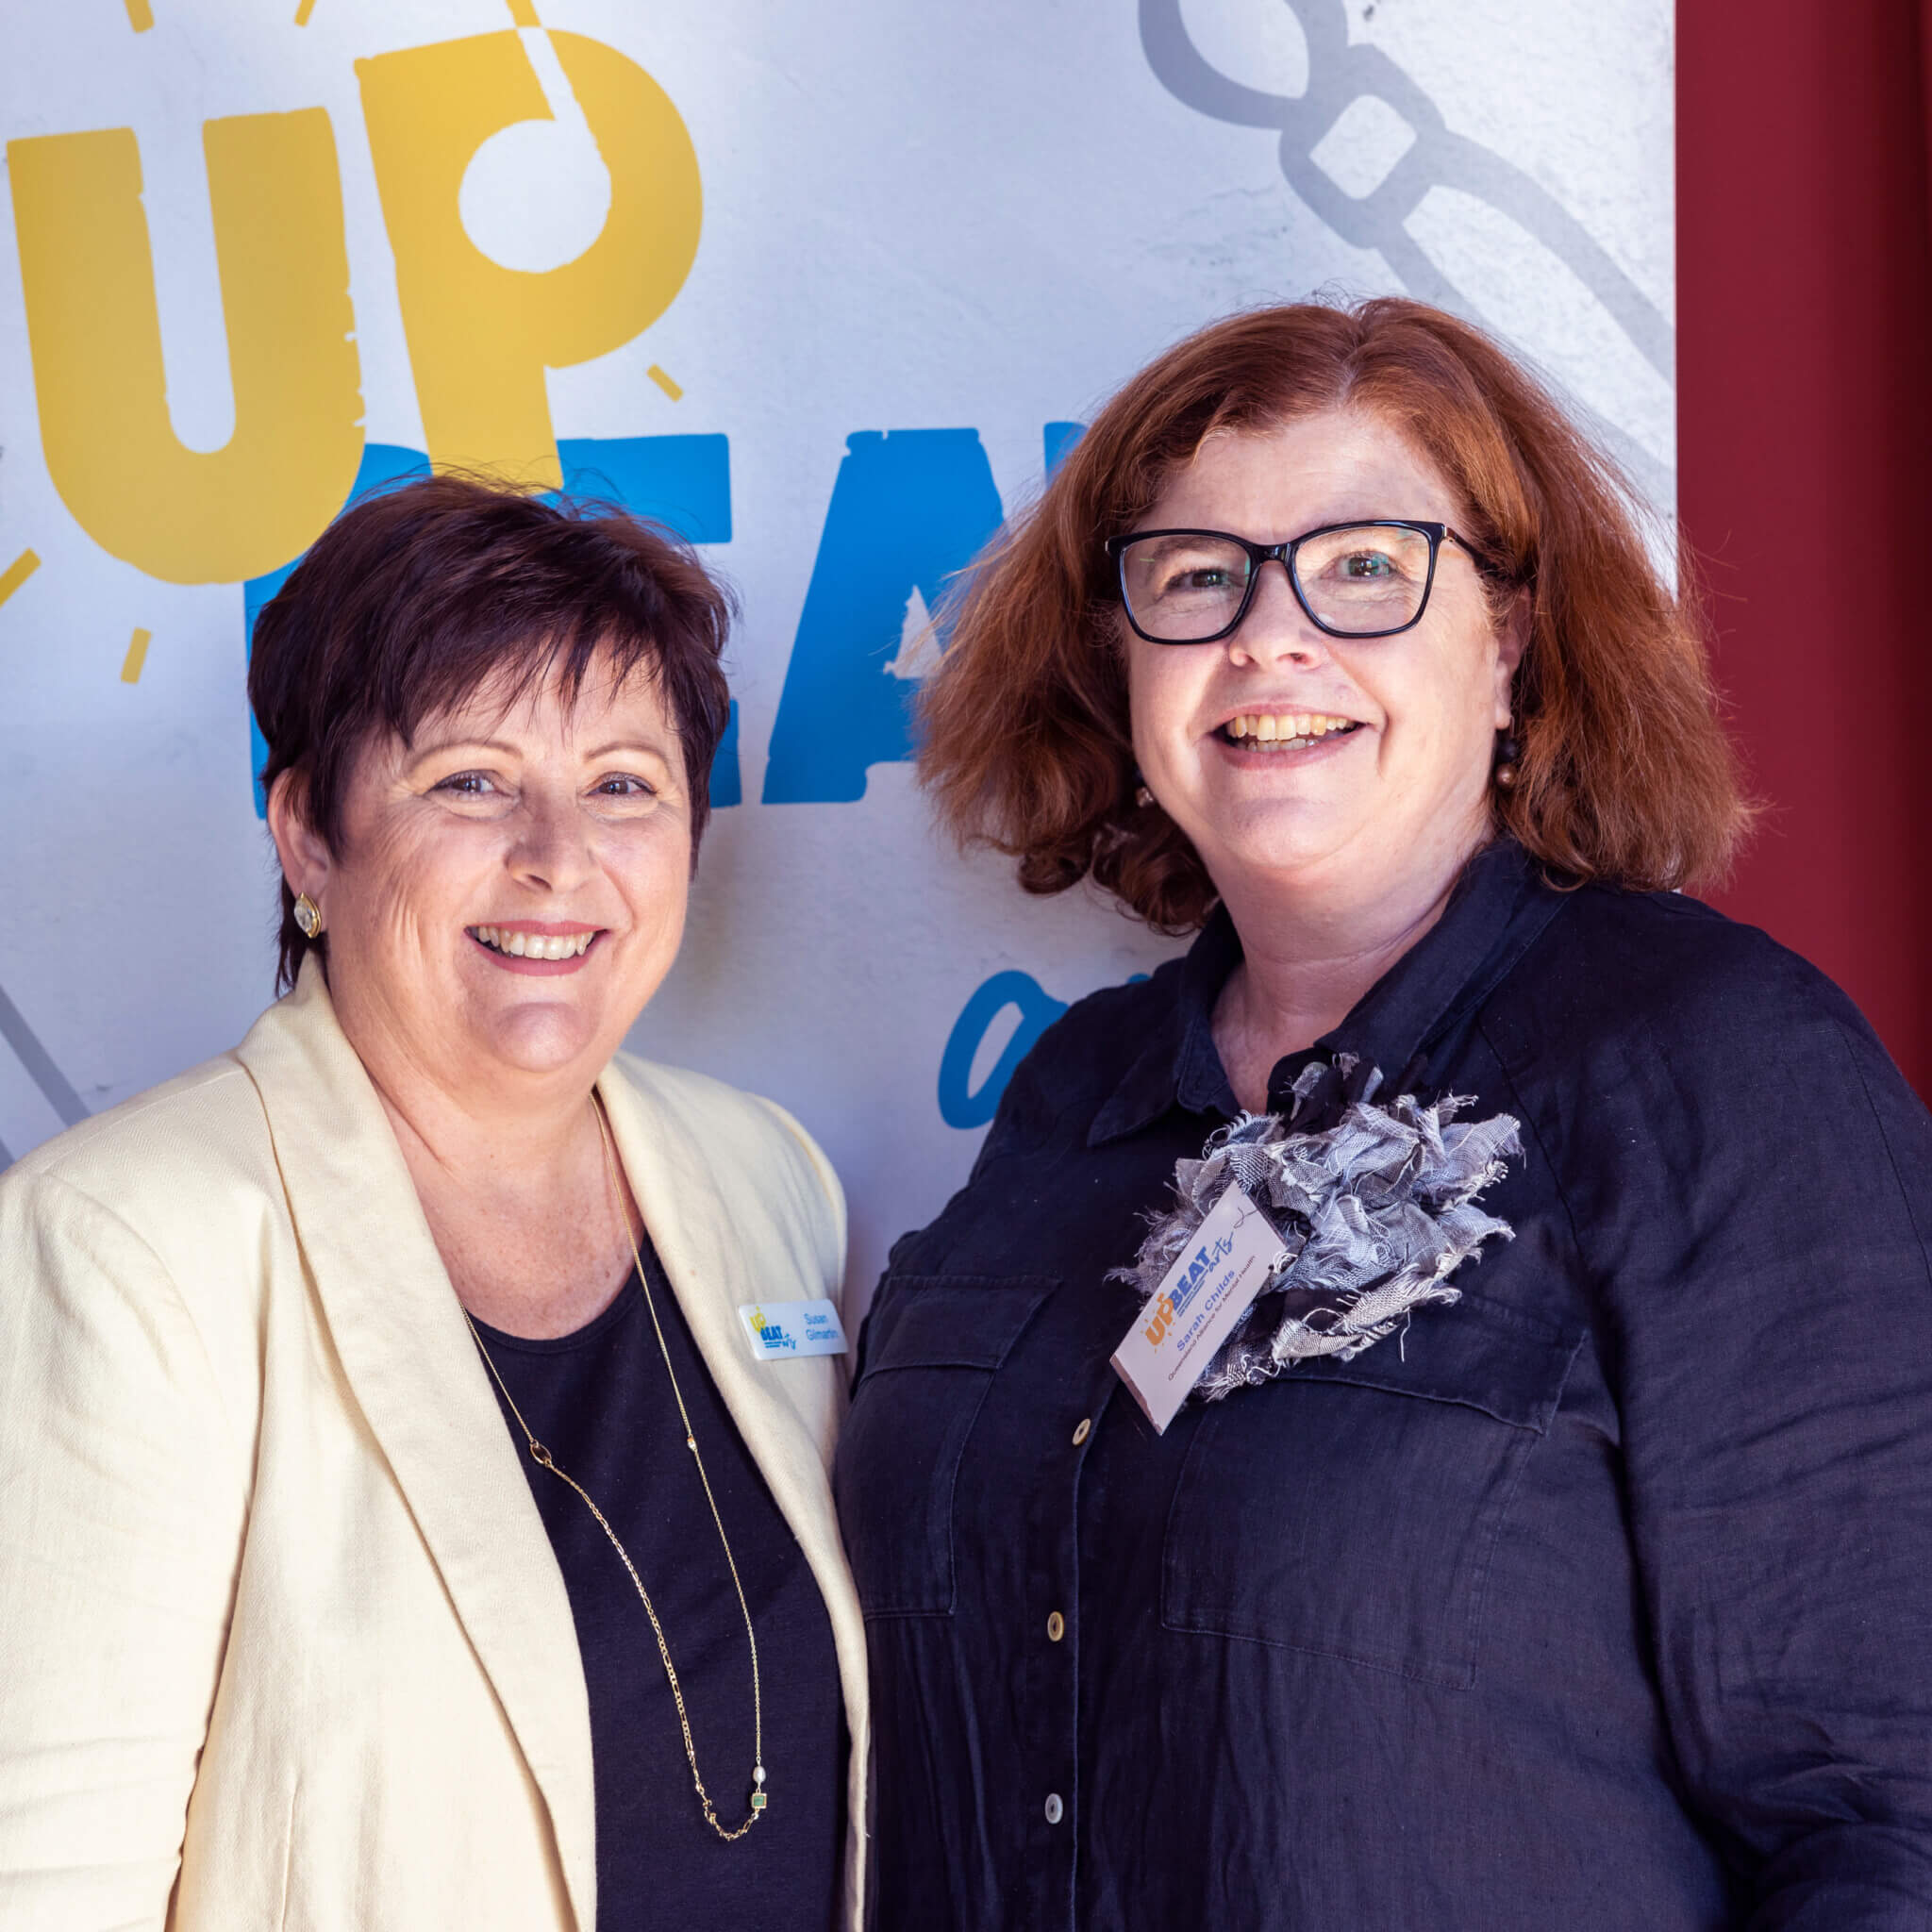 Two of our women members smile for the camera. The woman on the left has short red hair, and wears a cream blazer over a navy top. The woman on the right has shoulder length red hair and wears glasses and a navy shirt.